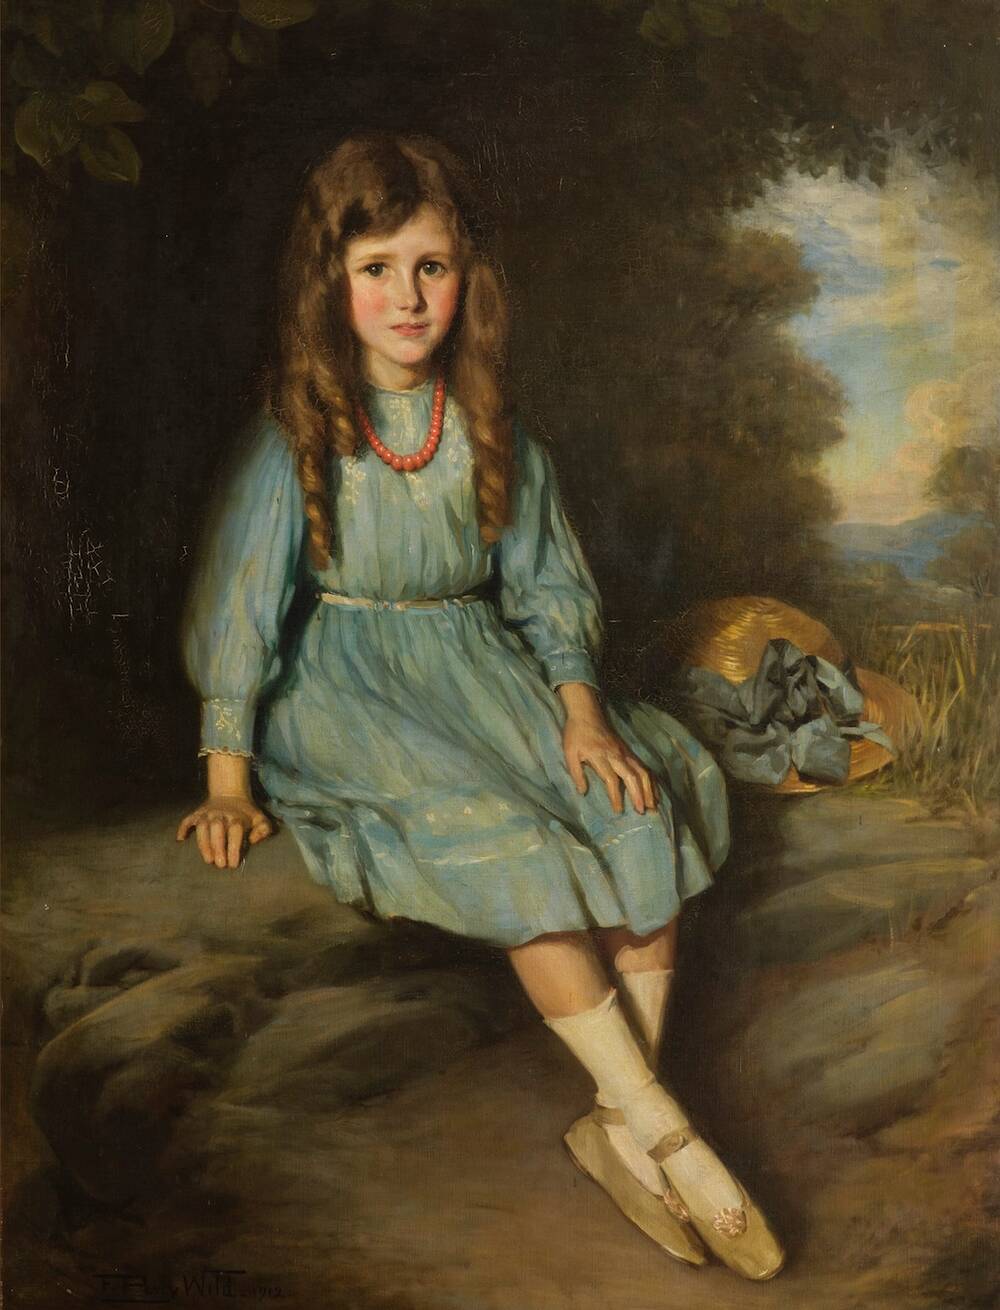 A painted portrait of a young girl sitting on a rock underneath dense overhanging foliage. She has long brown hair in curls, and is wearing a blue long-sleeved dress with white socks and ballerina pumps. Her wide-brimmed hat with a matching blue bow is beside her on the rock.